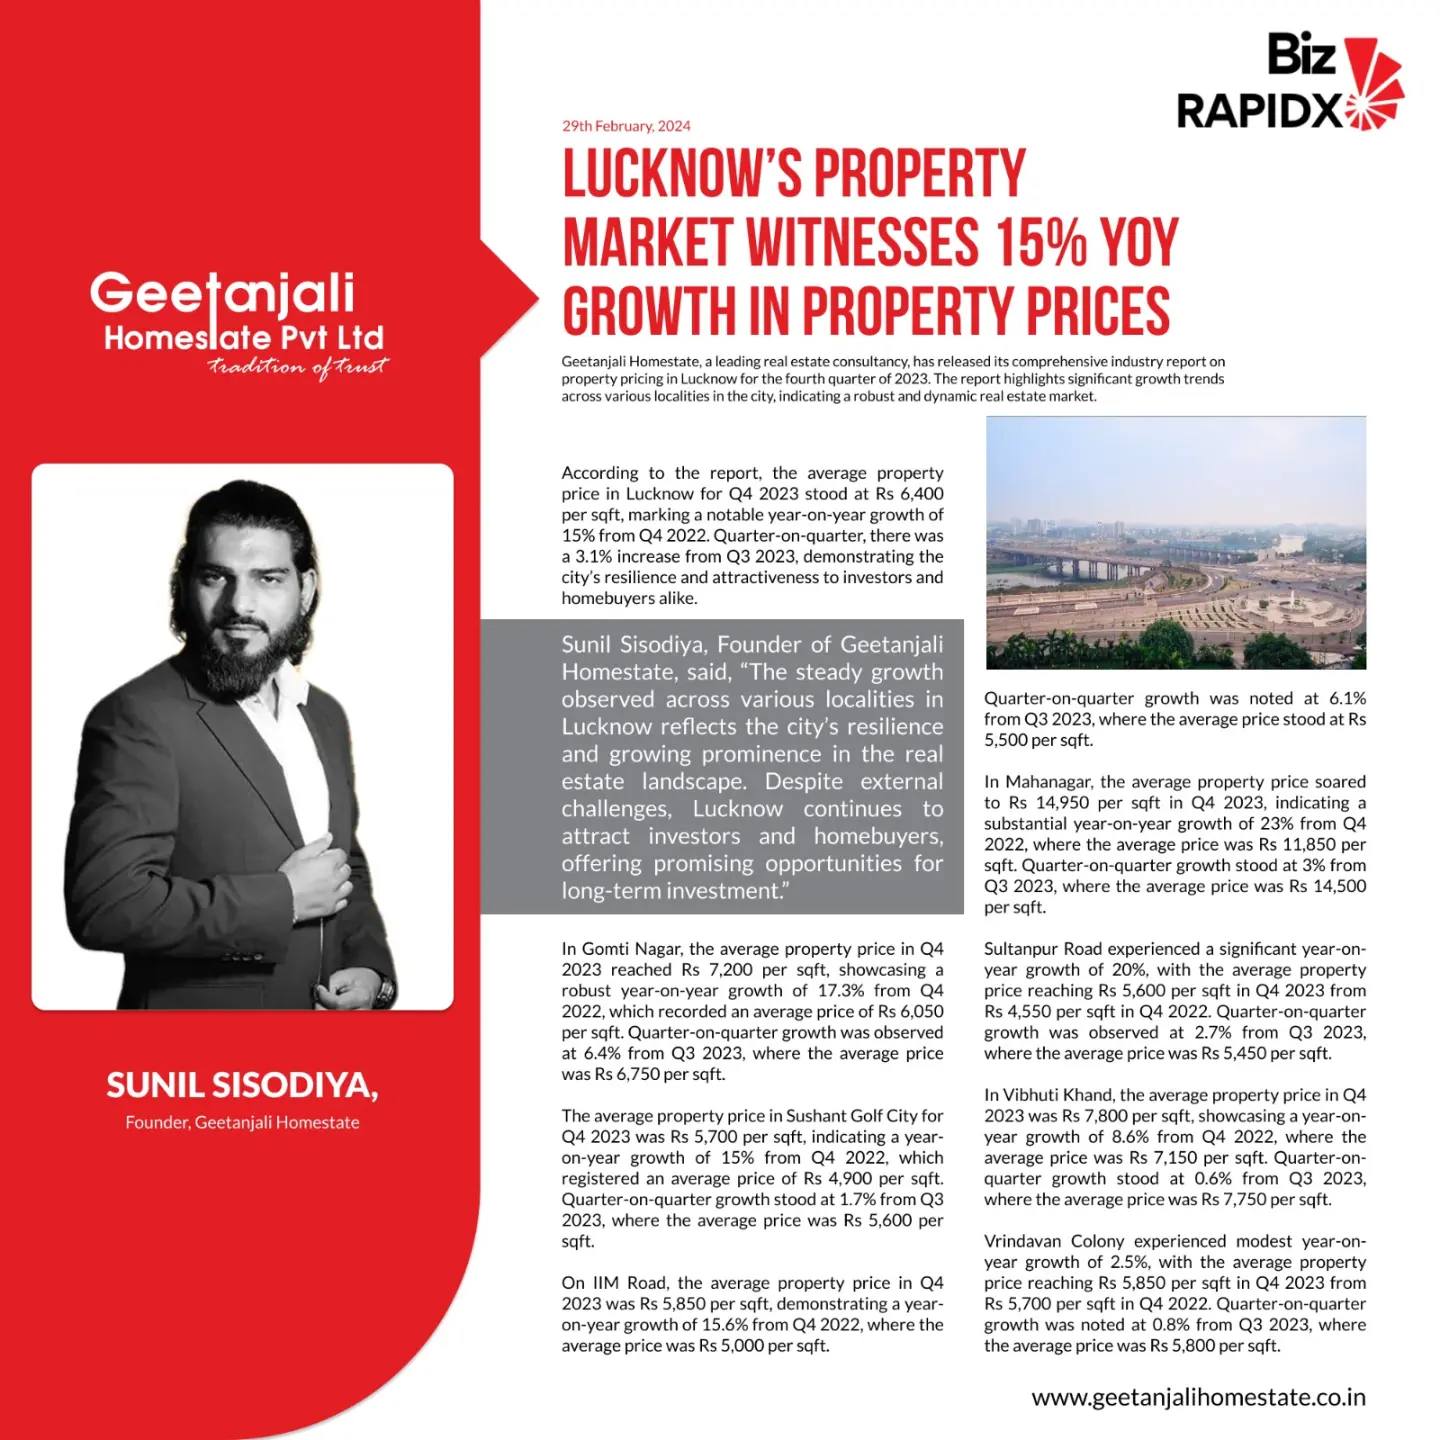 Lucknow’s Property Market Witnesses 15% YOY Growth in Property Prices